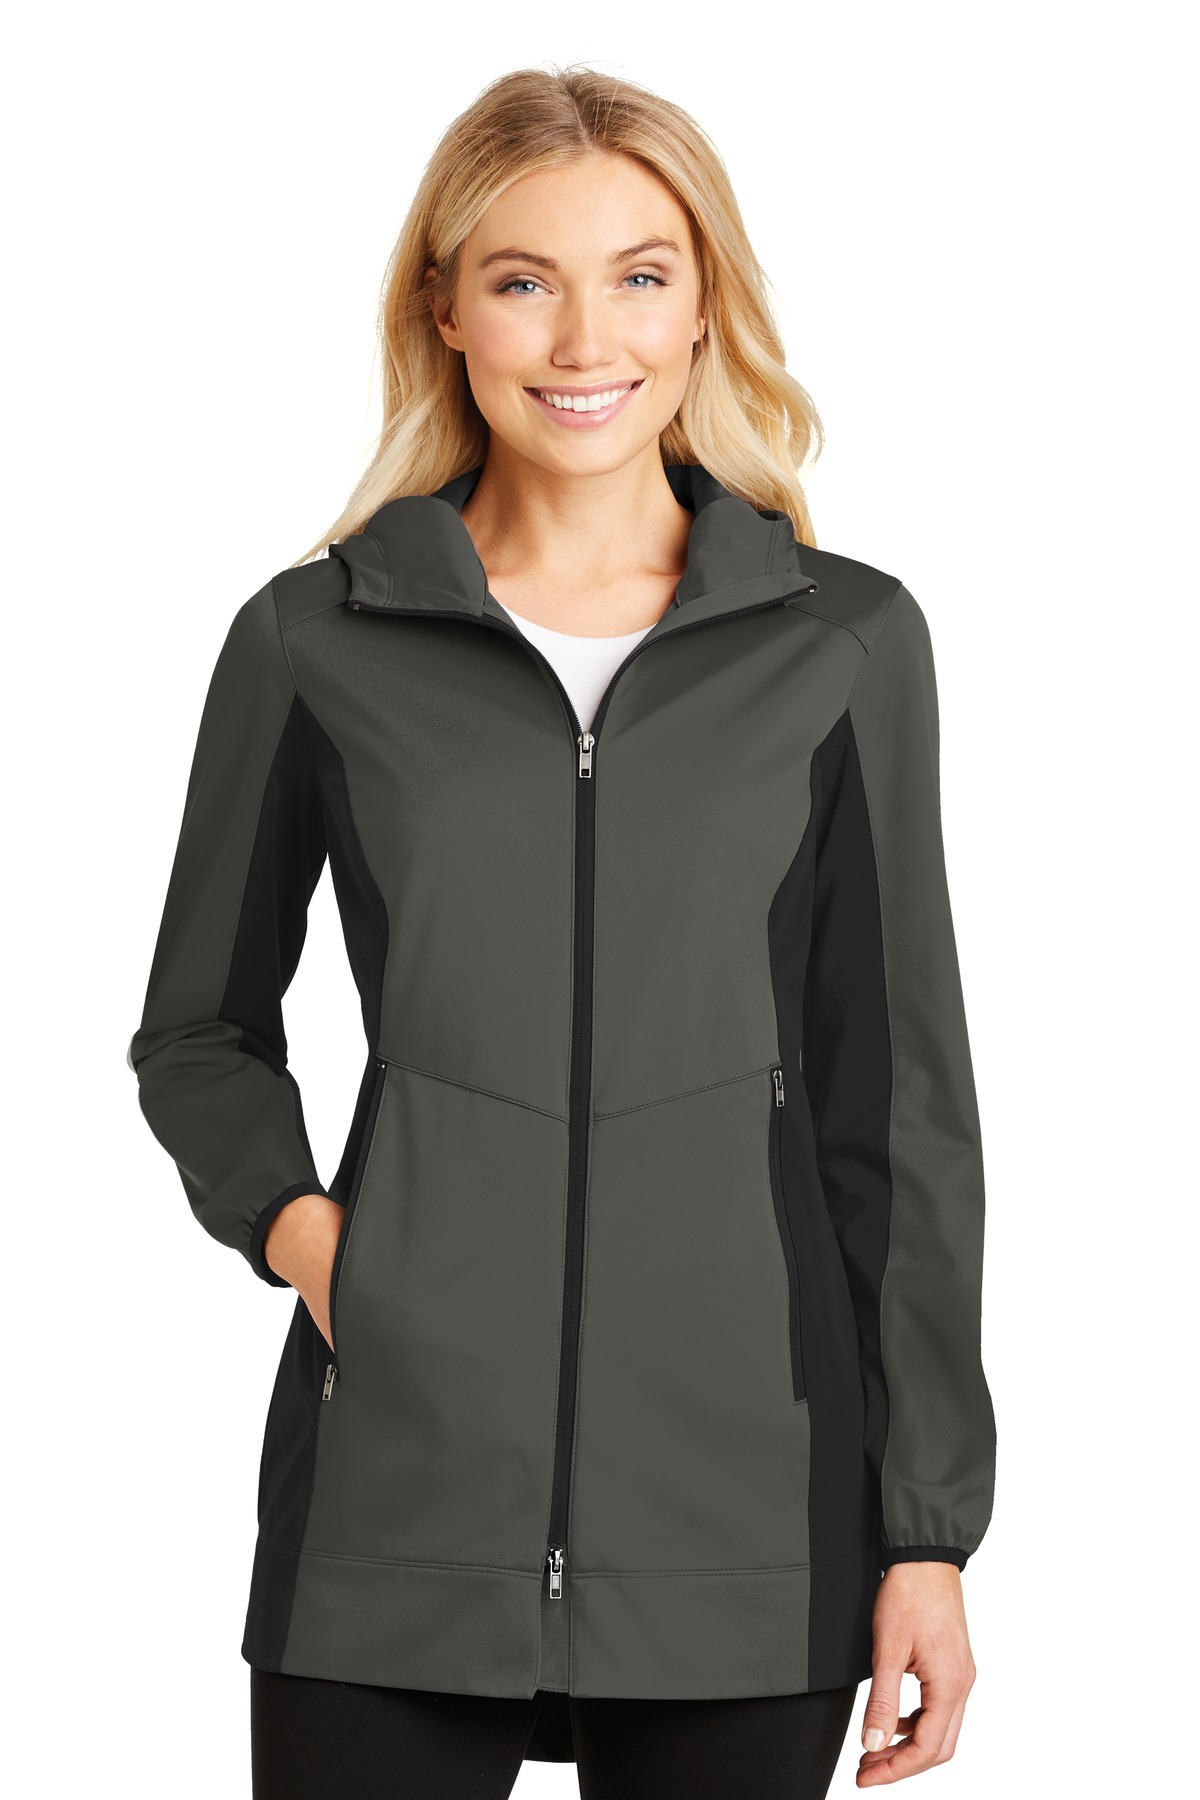 Port Authority Ladies Active Hooded Soft Shell Jacket-L (Grey Steel/ Deep Black) - image 1 of 6